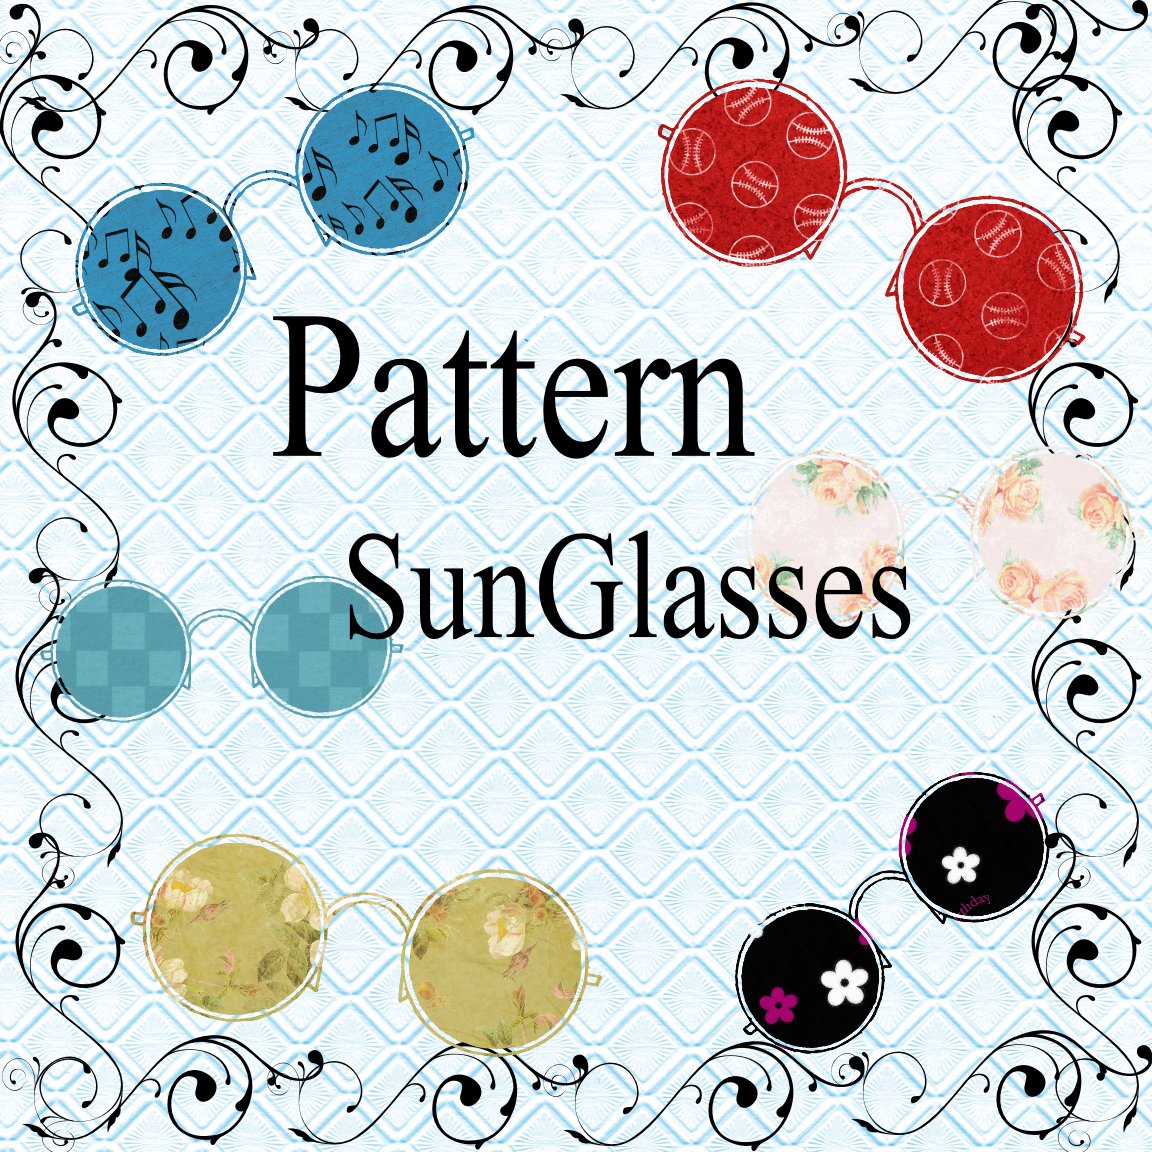 Pattern SunGlasses-Digital ClipArt-Art Clip-Gift Tag-Flowers-Scrapbook-Banner-Background-Gift Card.